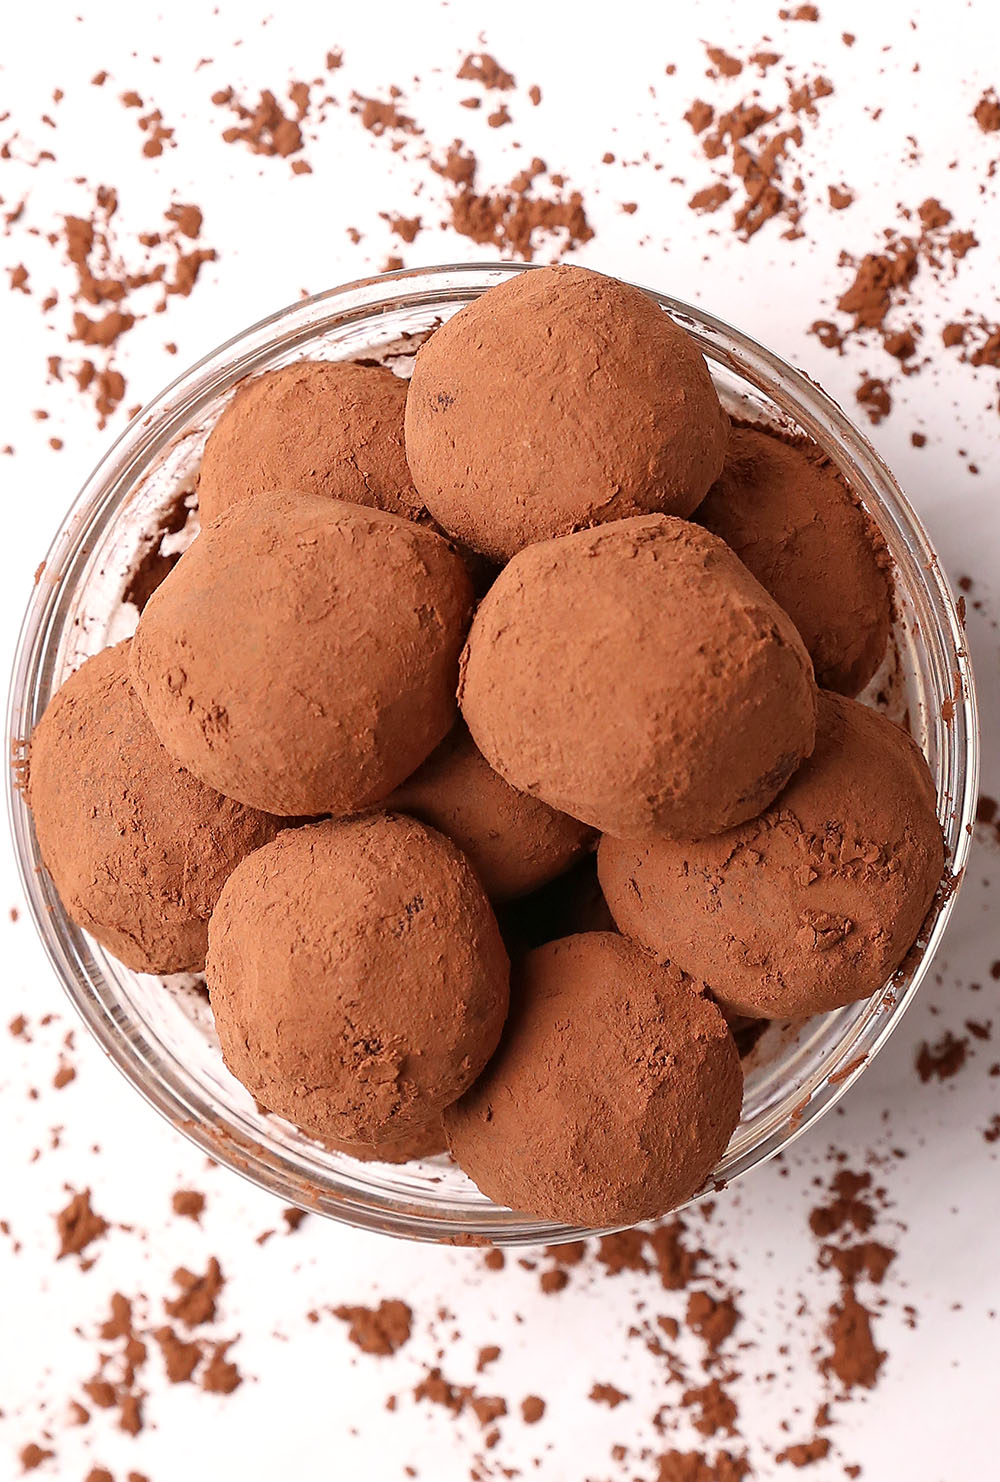 These Mexican Hot Chocolate Balls made with bittersweet chocolate, cinnamon, nutmeg and a hint of cayenne pepper or chili will warm you up this winter! Perfect for Christmas, Valentine’s Day....or a random winter day.